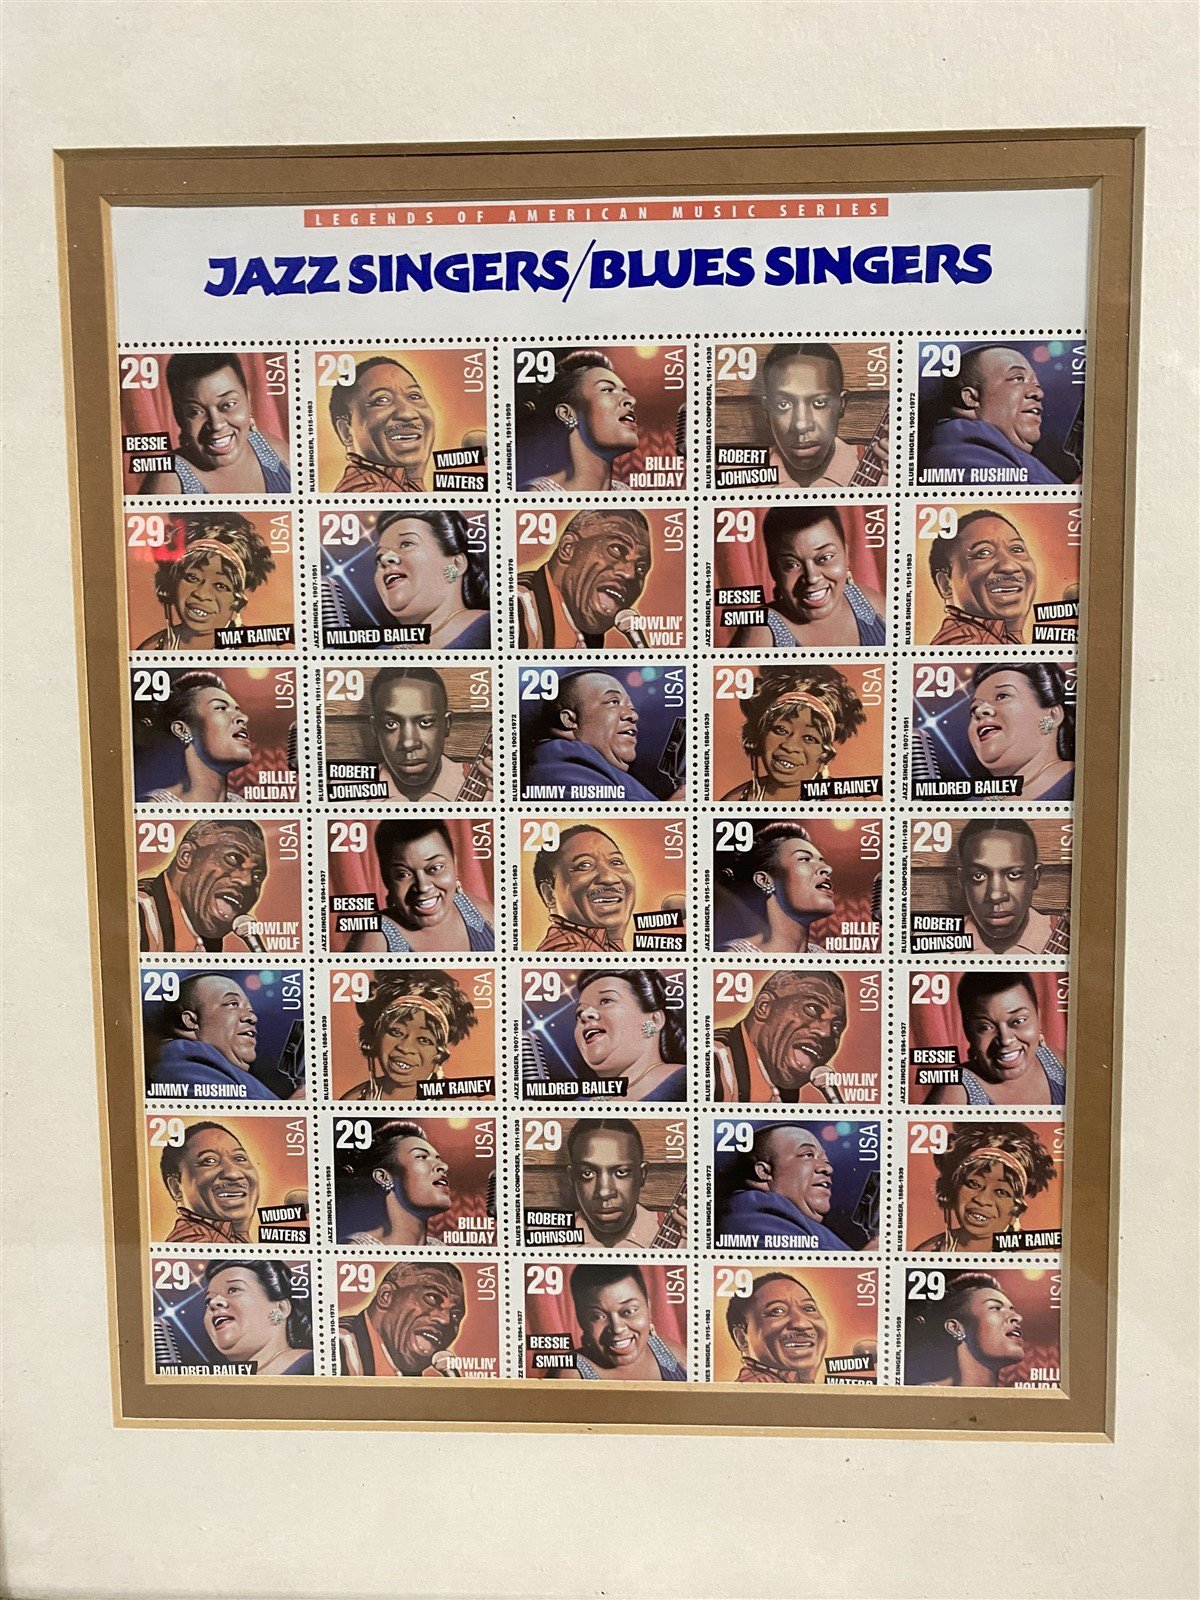 Jazz/Blues Singers Framed Sheet of 35 x 29 Cent Stamps Legends of American Music